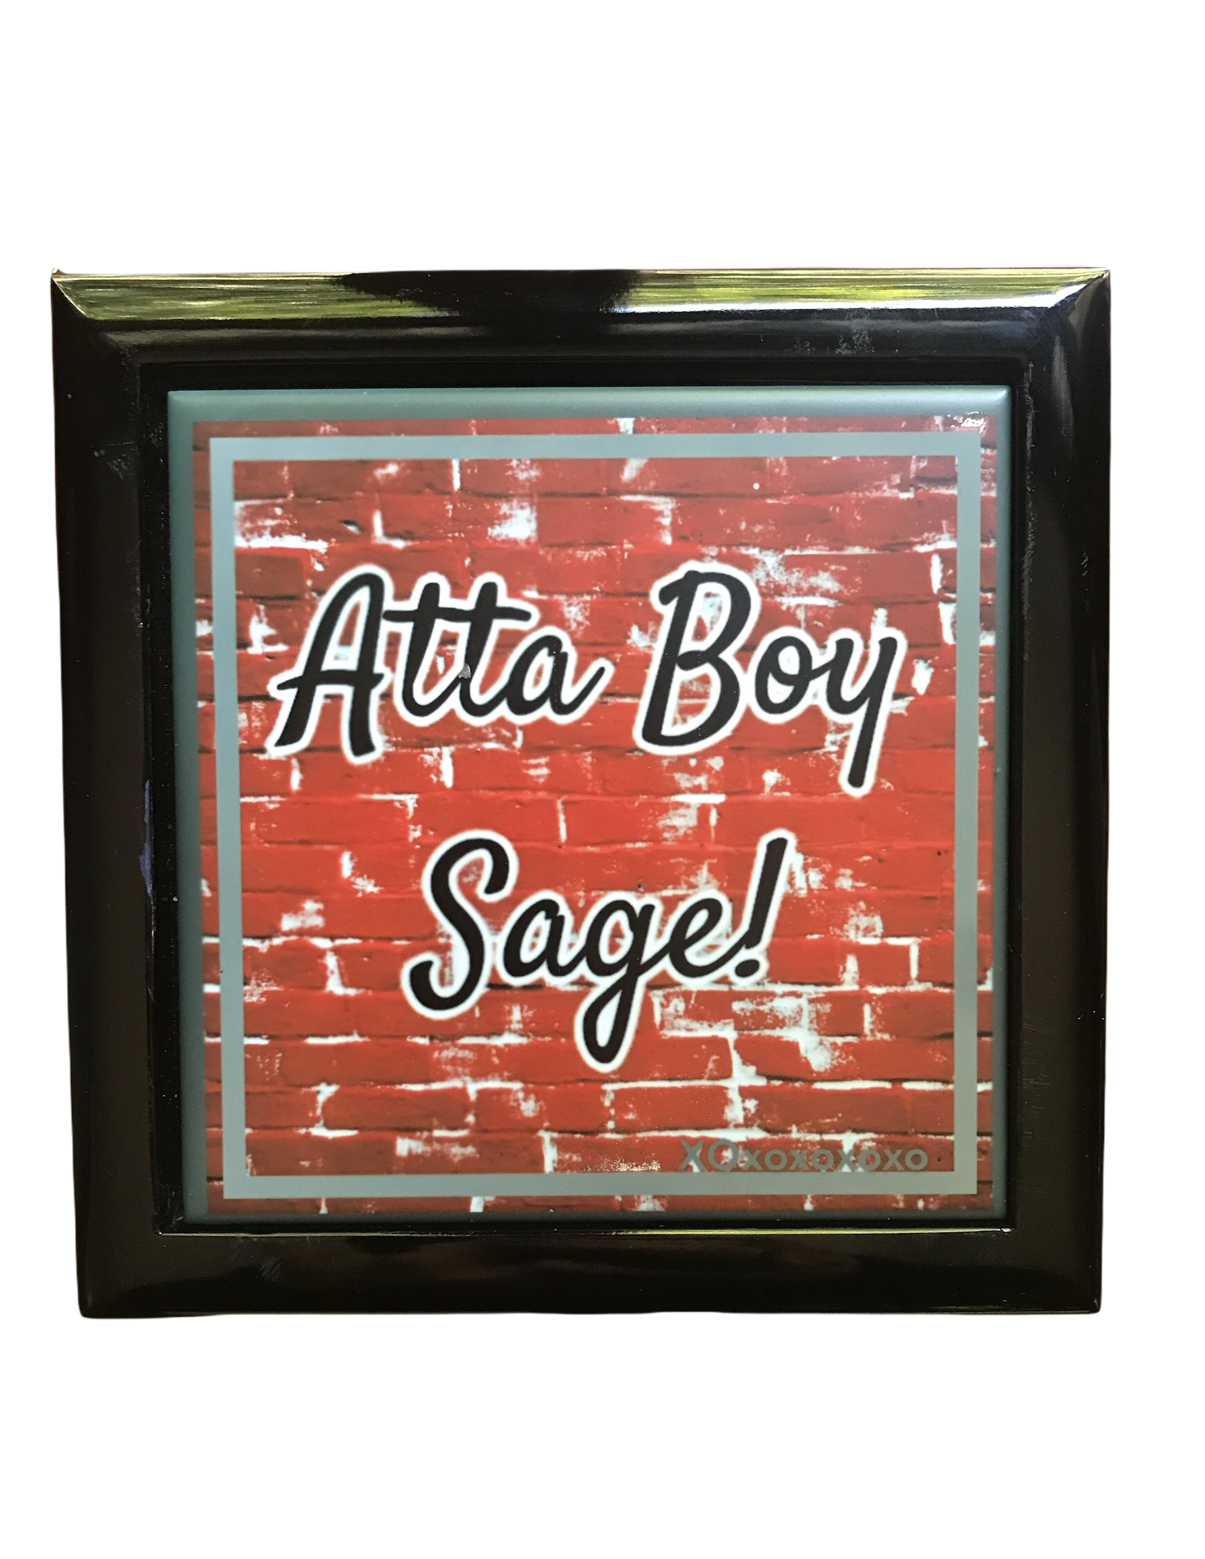 Atta Boy!  Wedding day gift made with sublimation printing